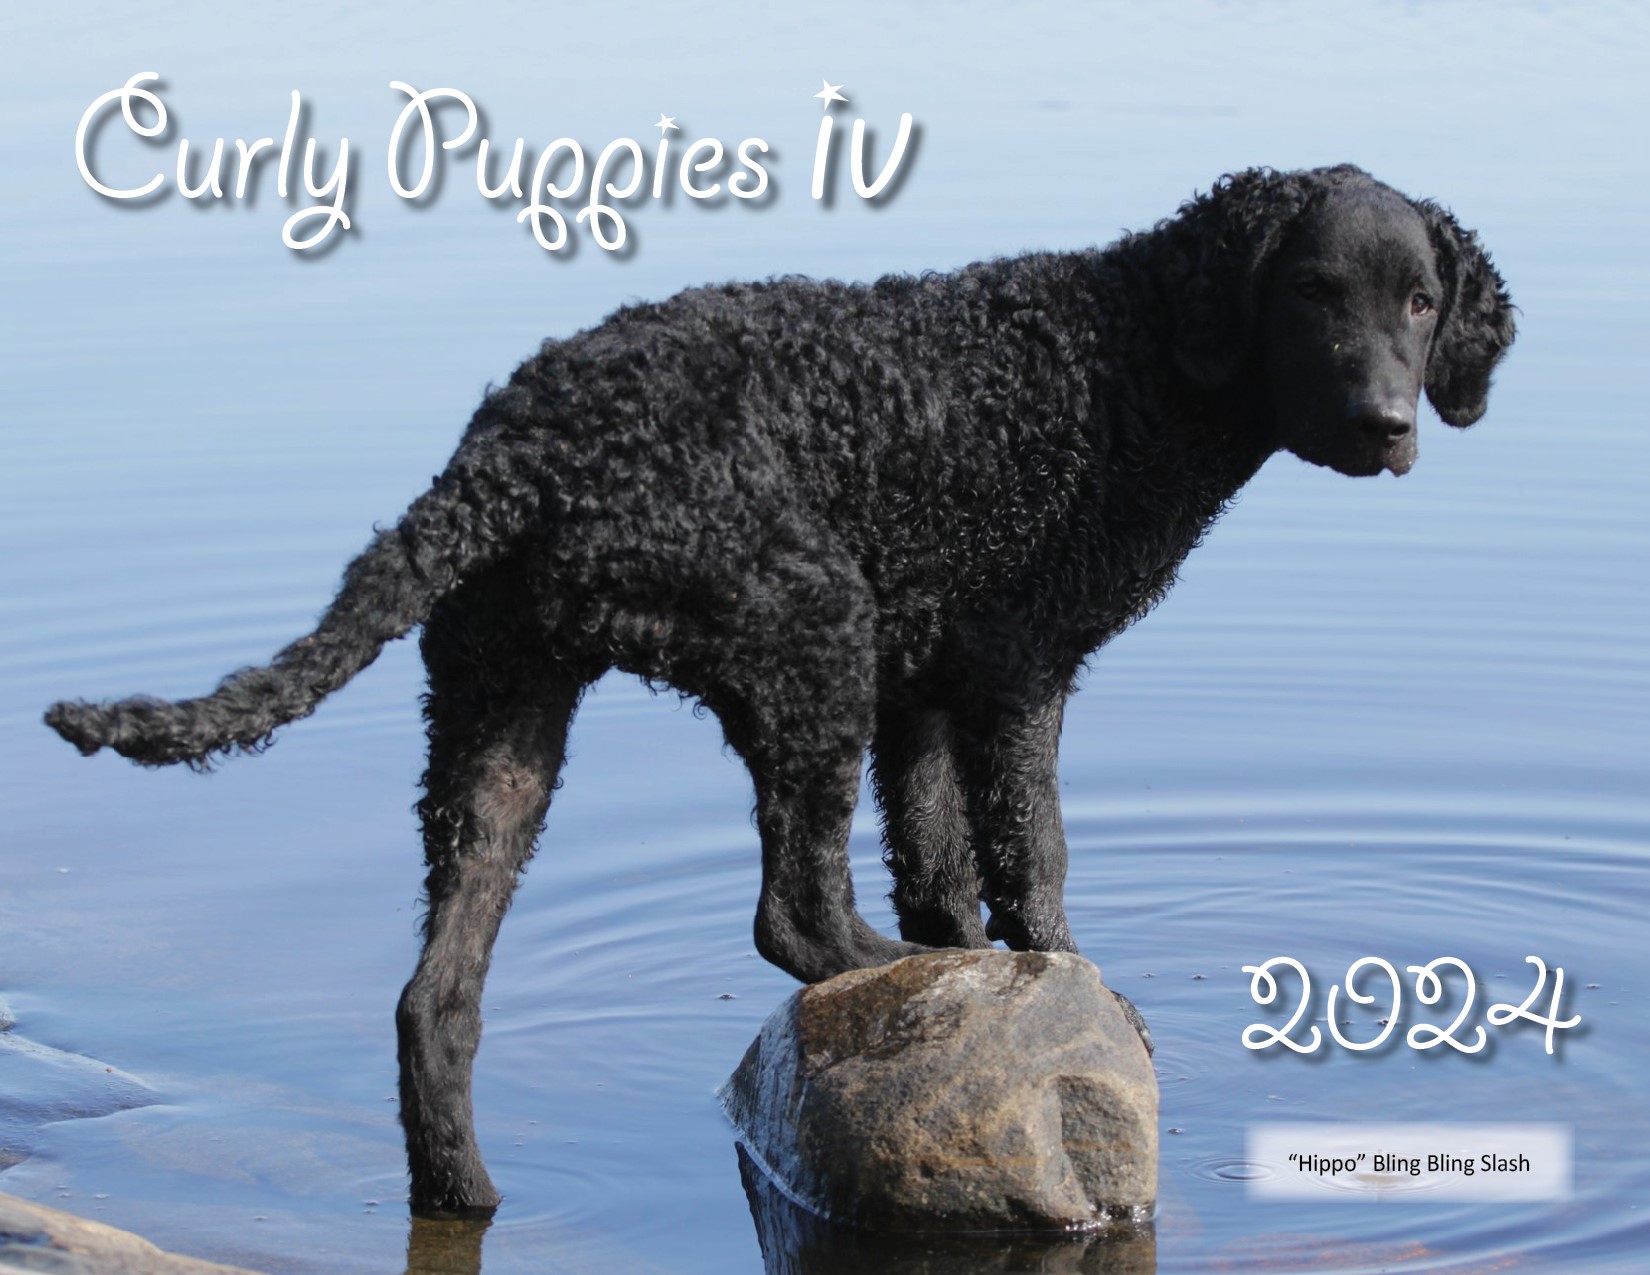 Calendar Cover "Curly Puppies IV"